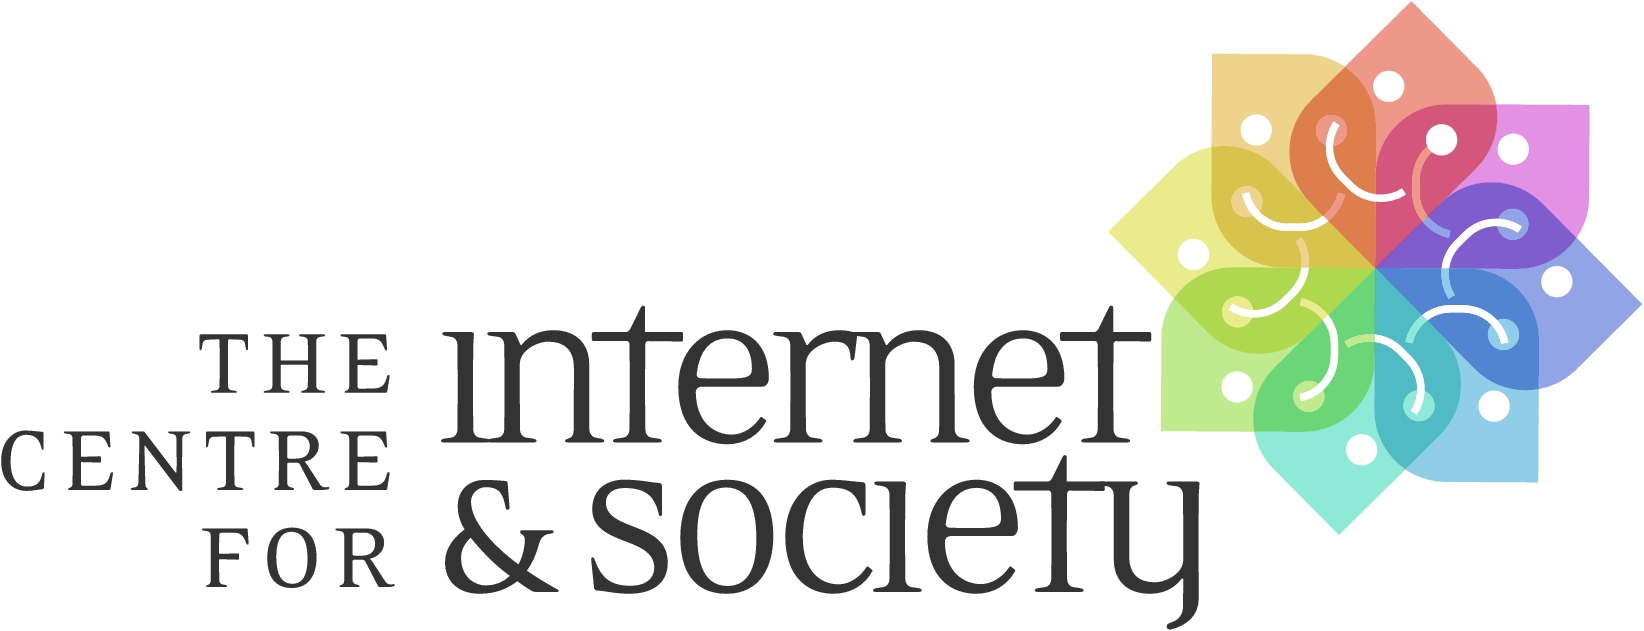 The Centre for Internet & Society